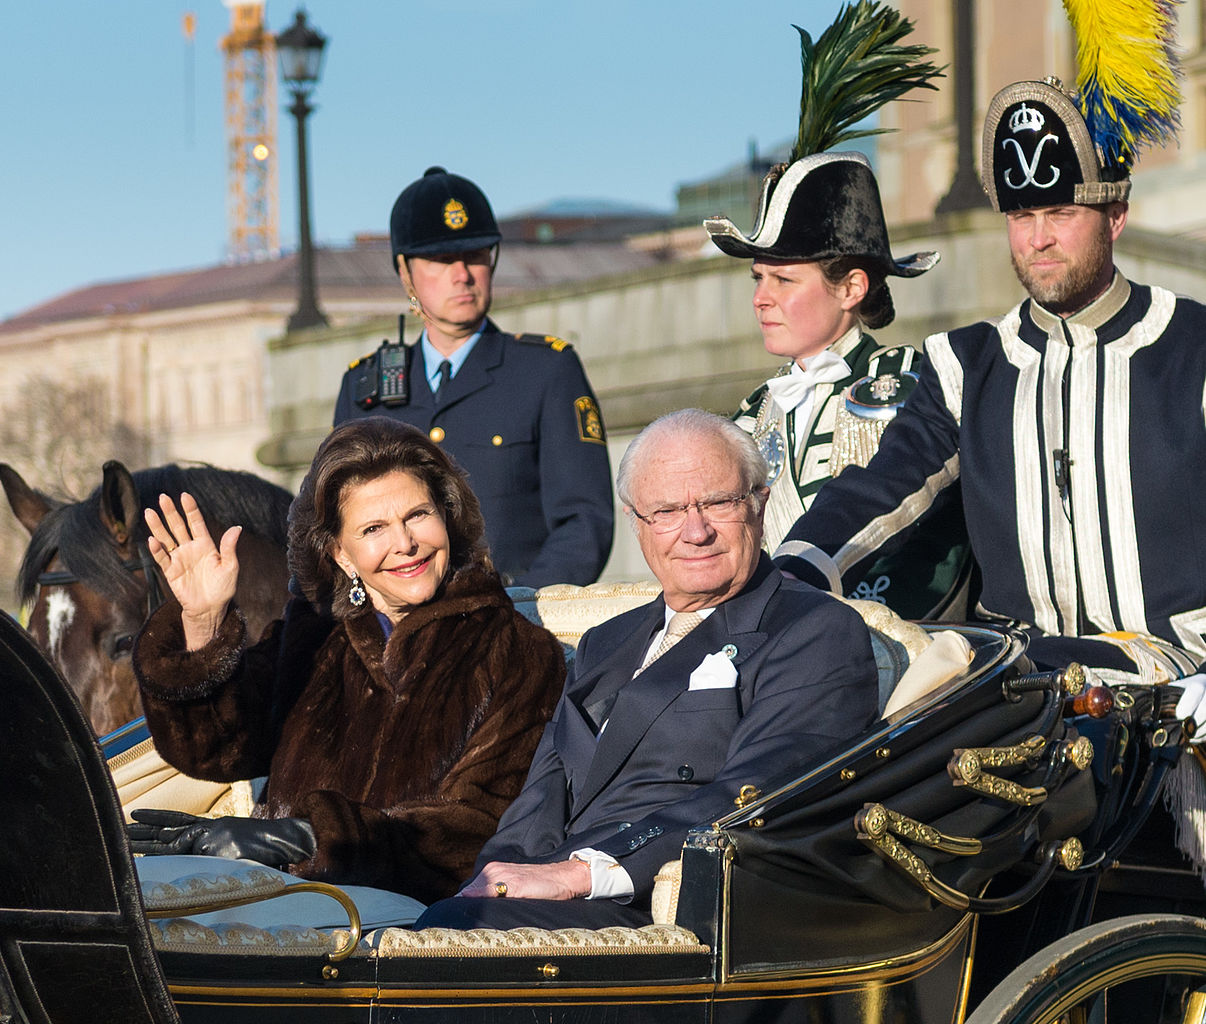 Carl XVI Gustaf and Queen Silvia in Stockholm. (Photo: Frankie Fouganthin/Wikimedia Commons/CC BY-SA 4.0)